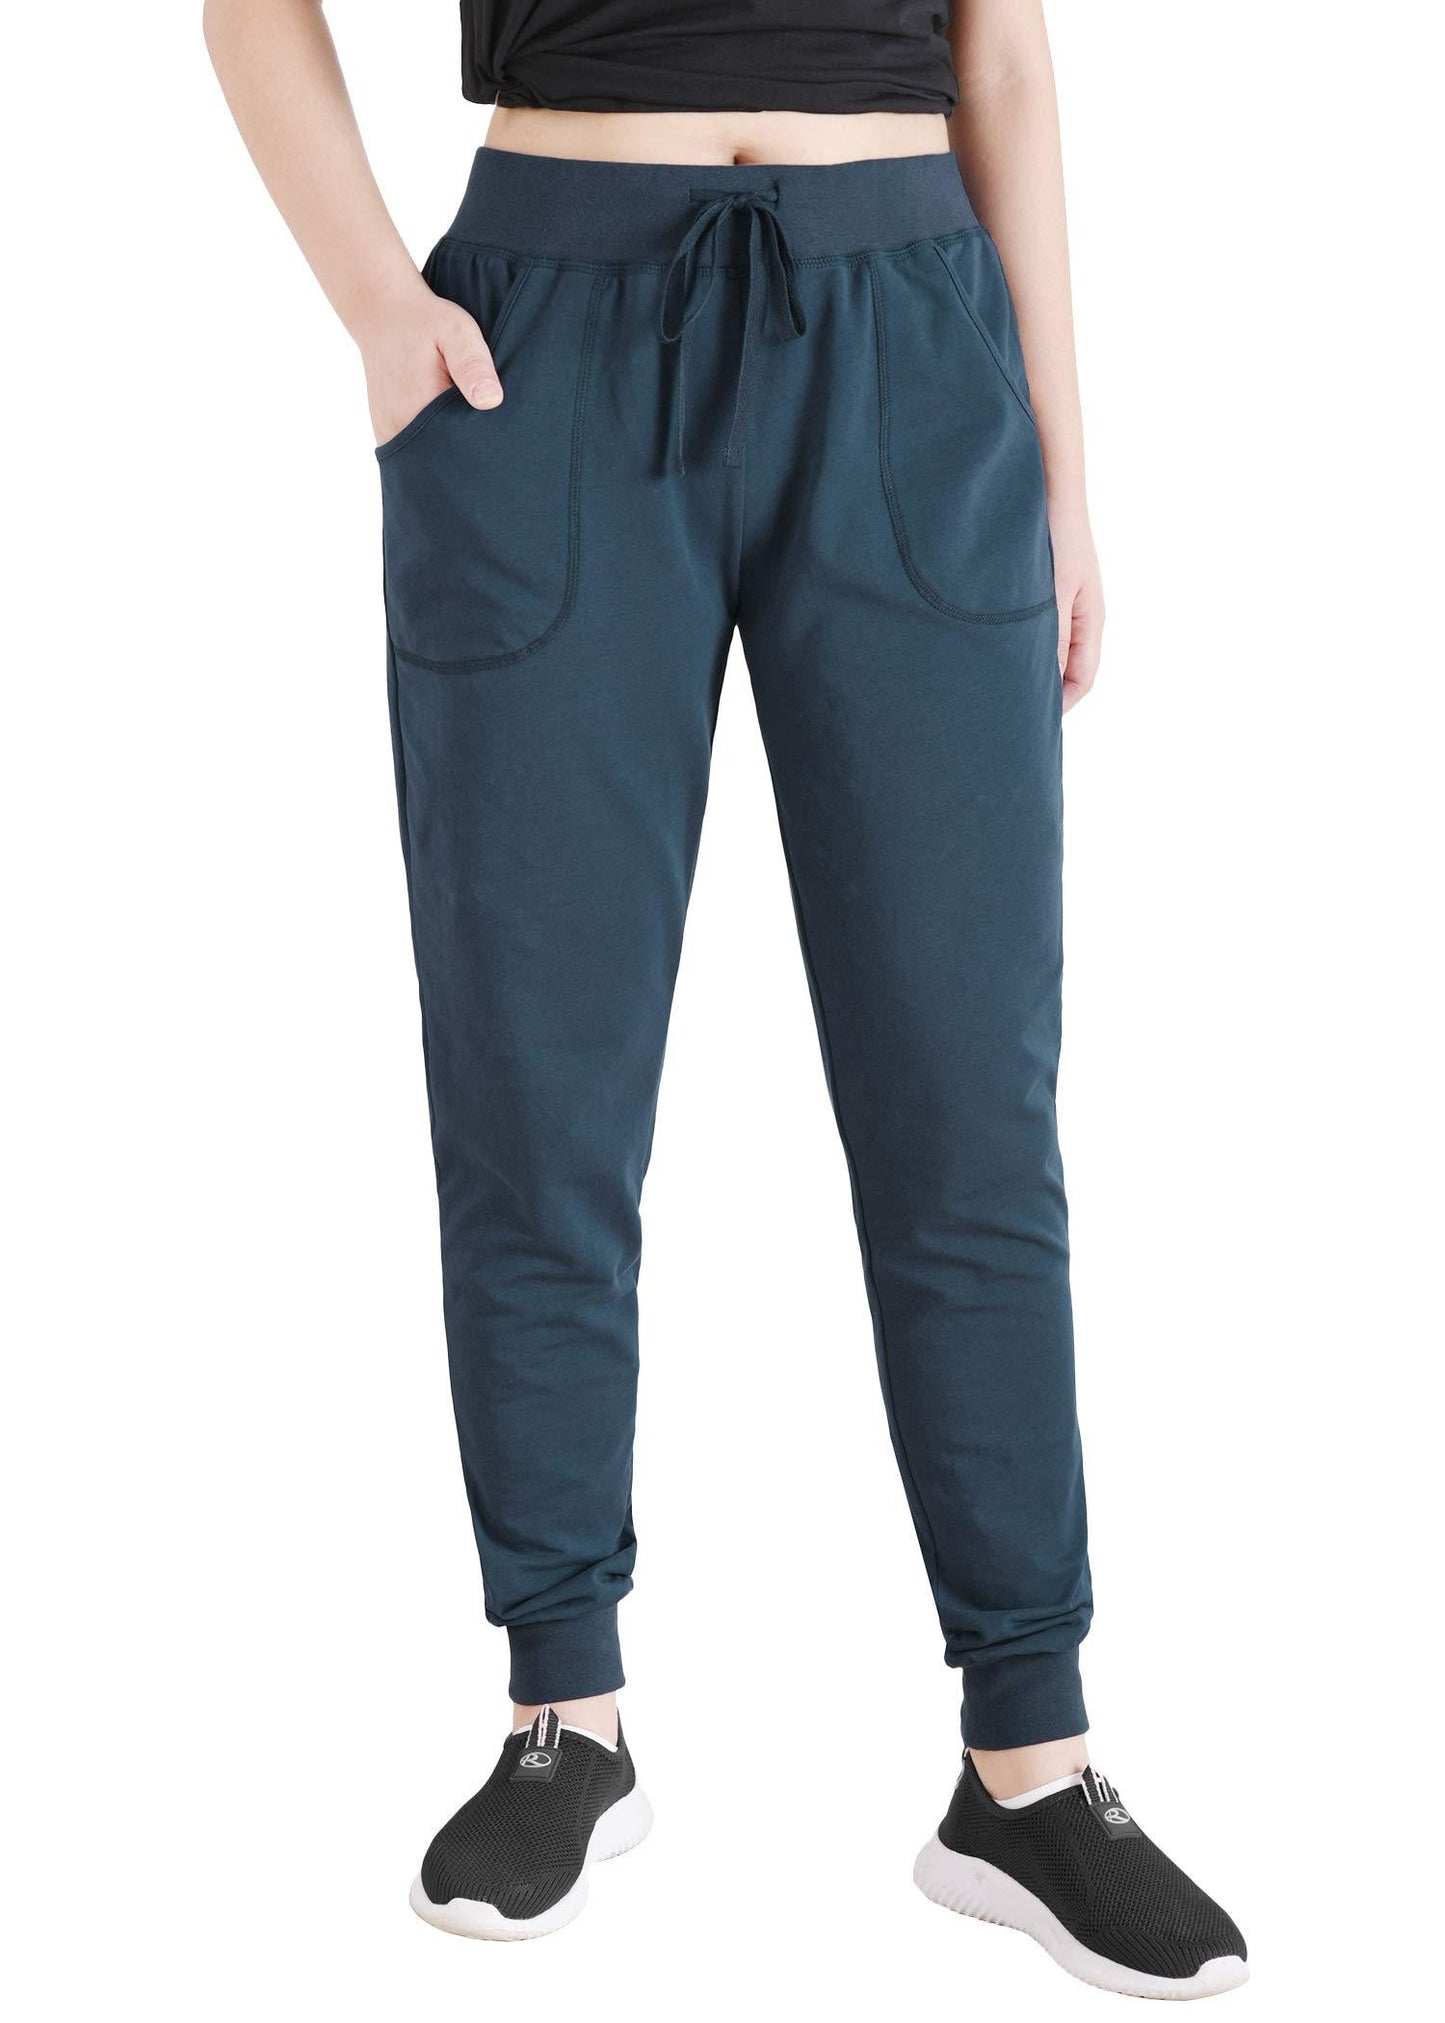 Cotton Jogger Pants for Women (with Pockets) in Many Colors